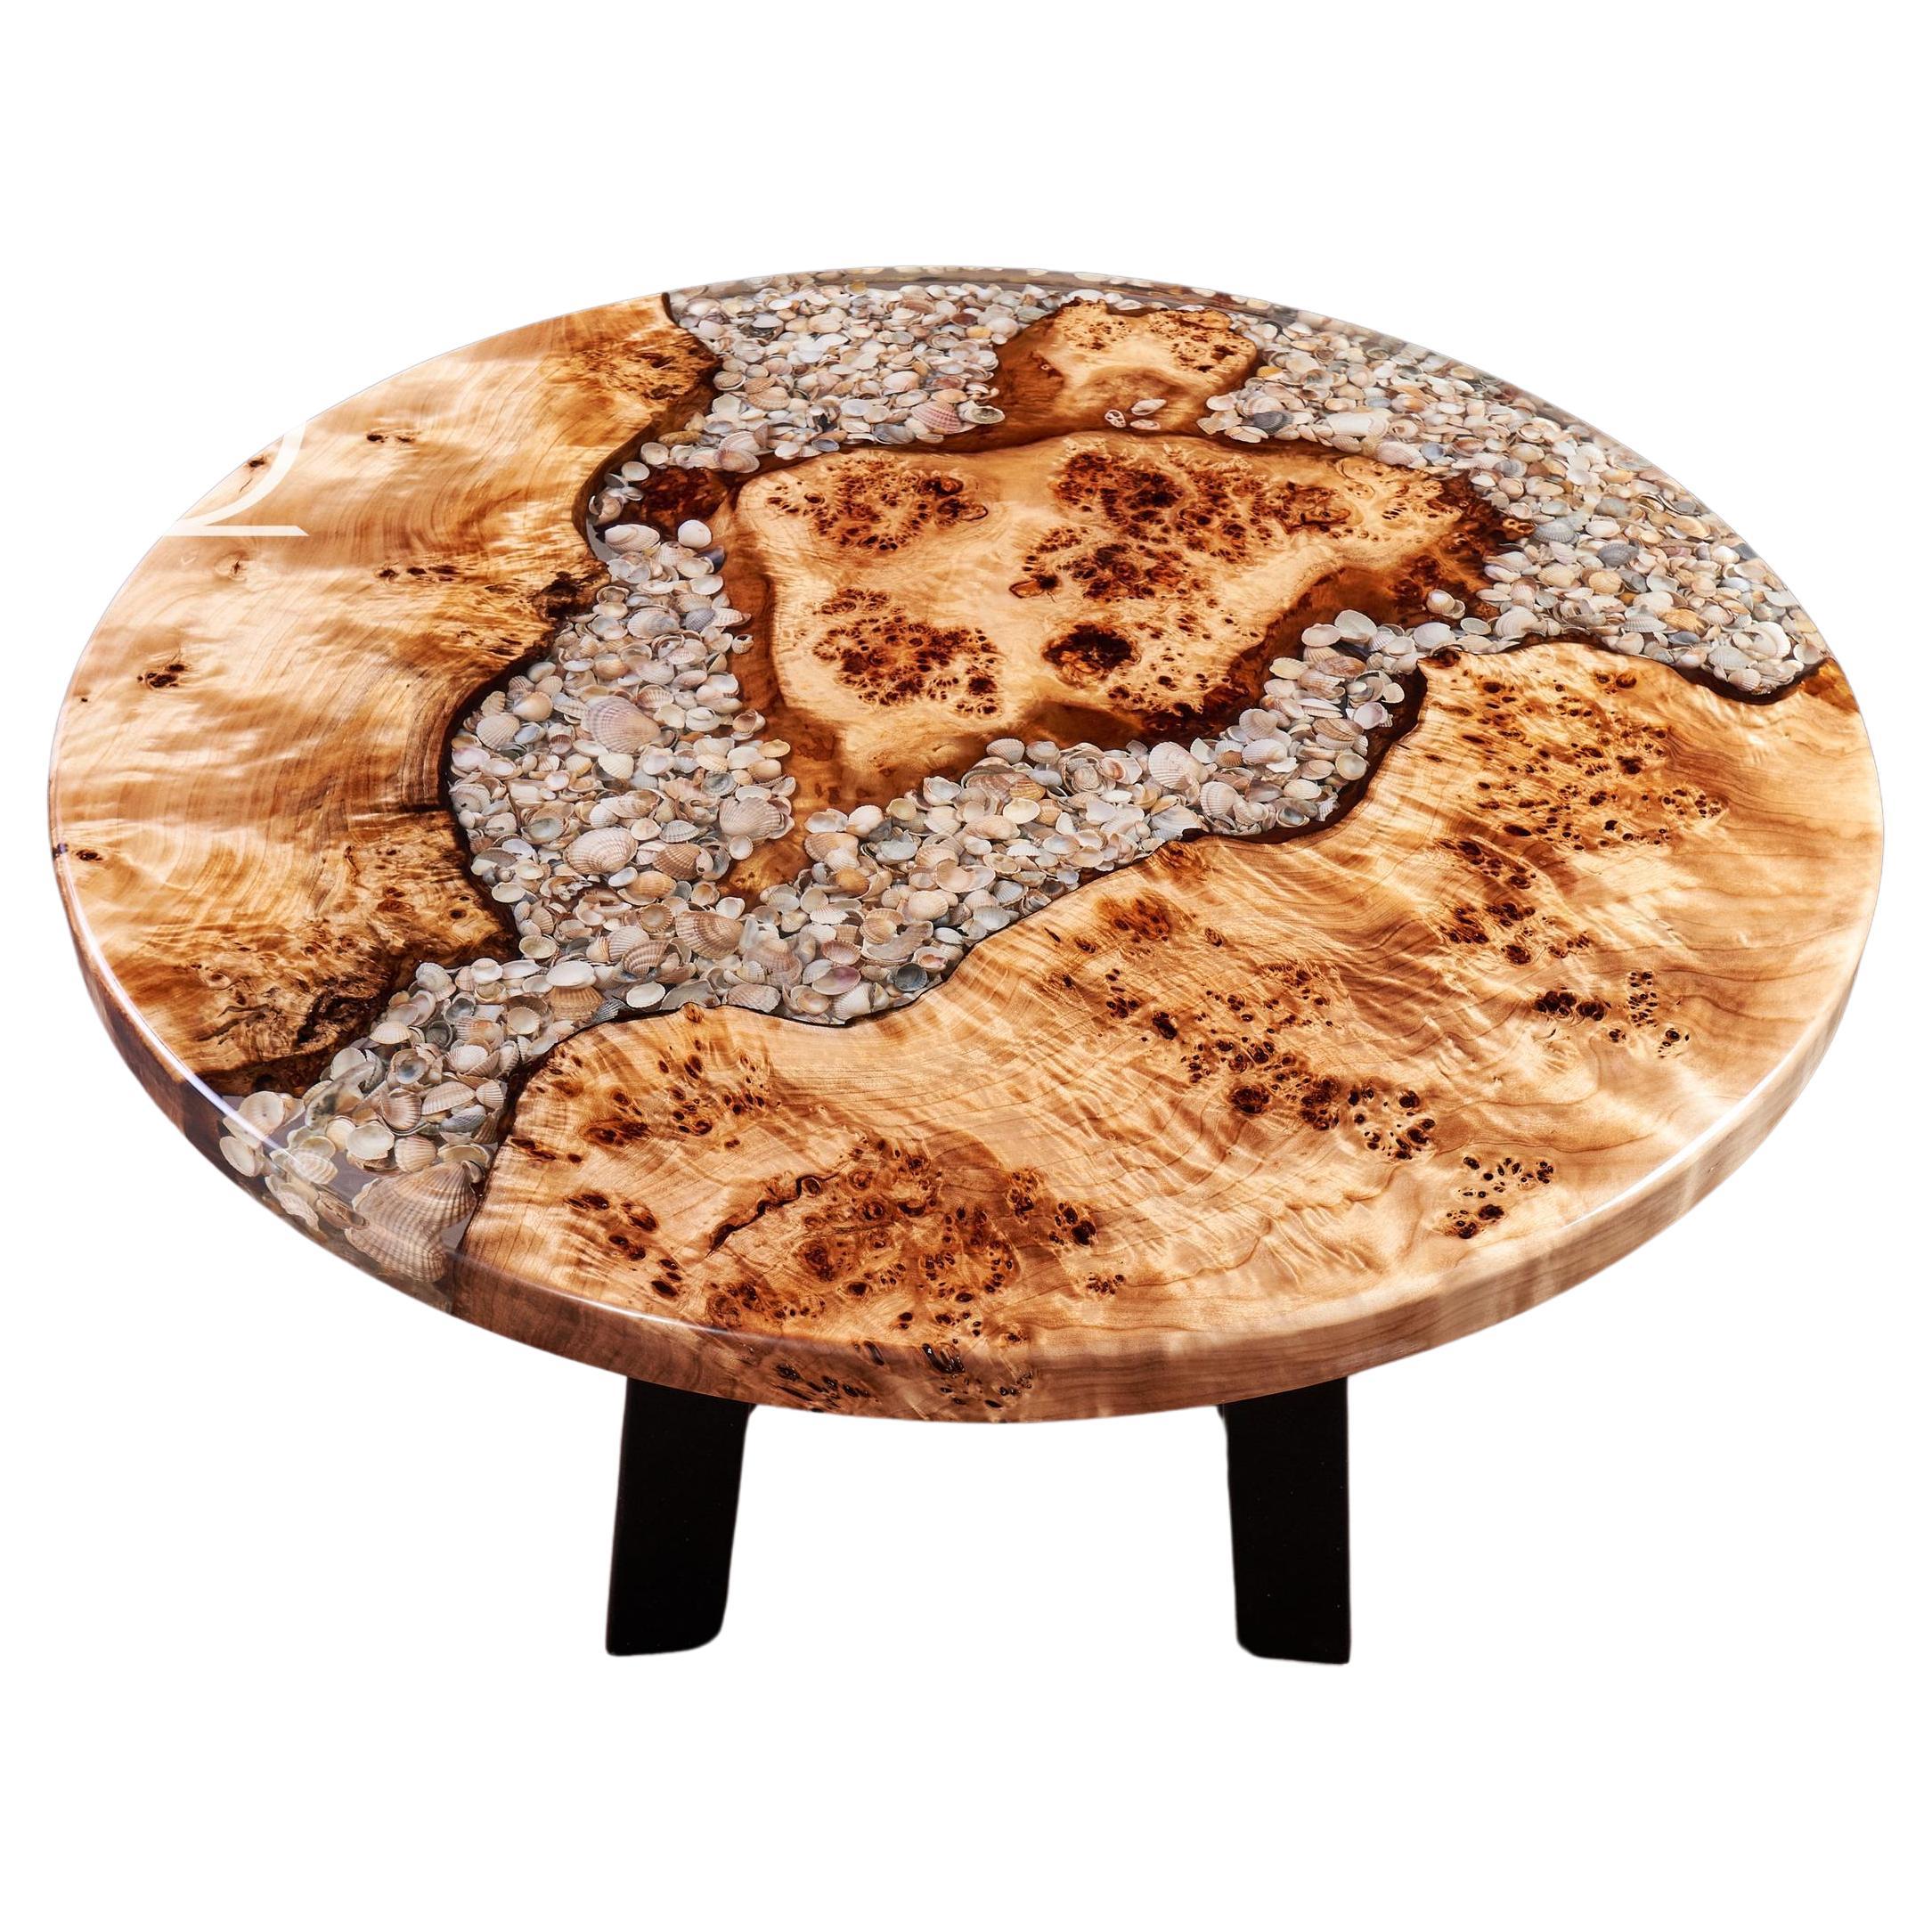 Burl Wood Coffee Table Contemporary Modern Coffee Table Round Wooden Resin Table For Sale